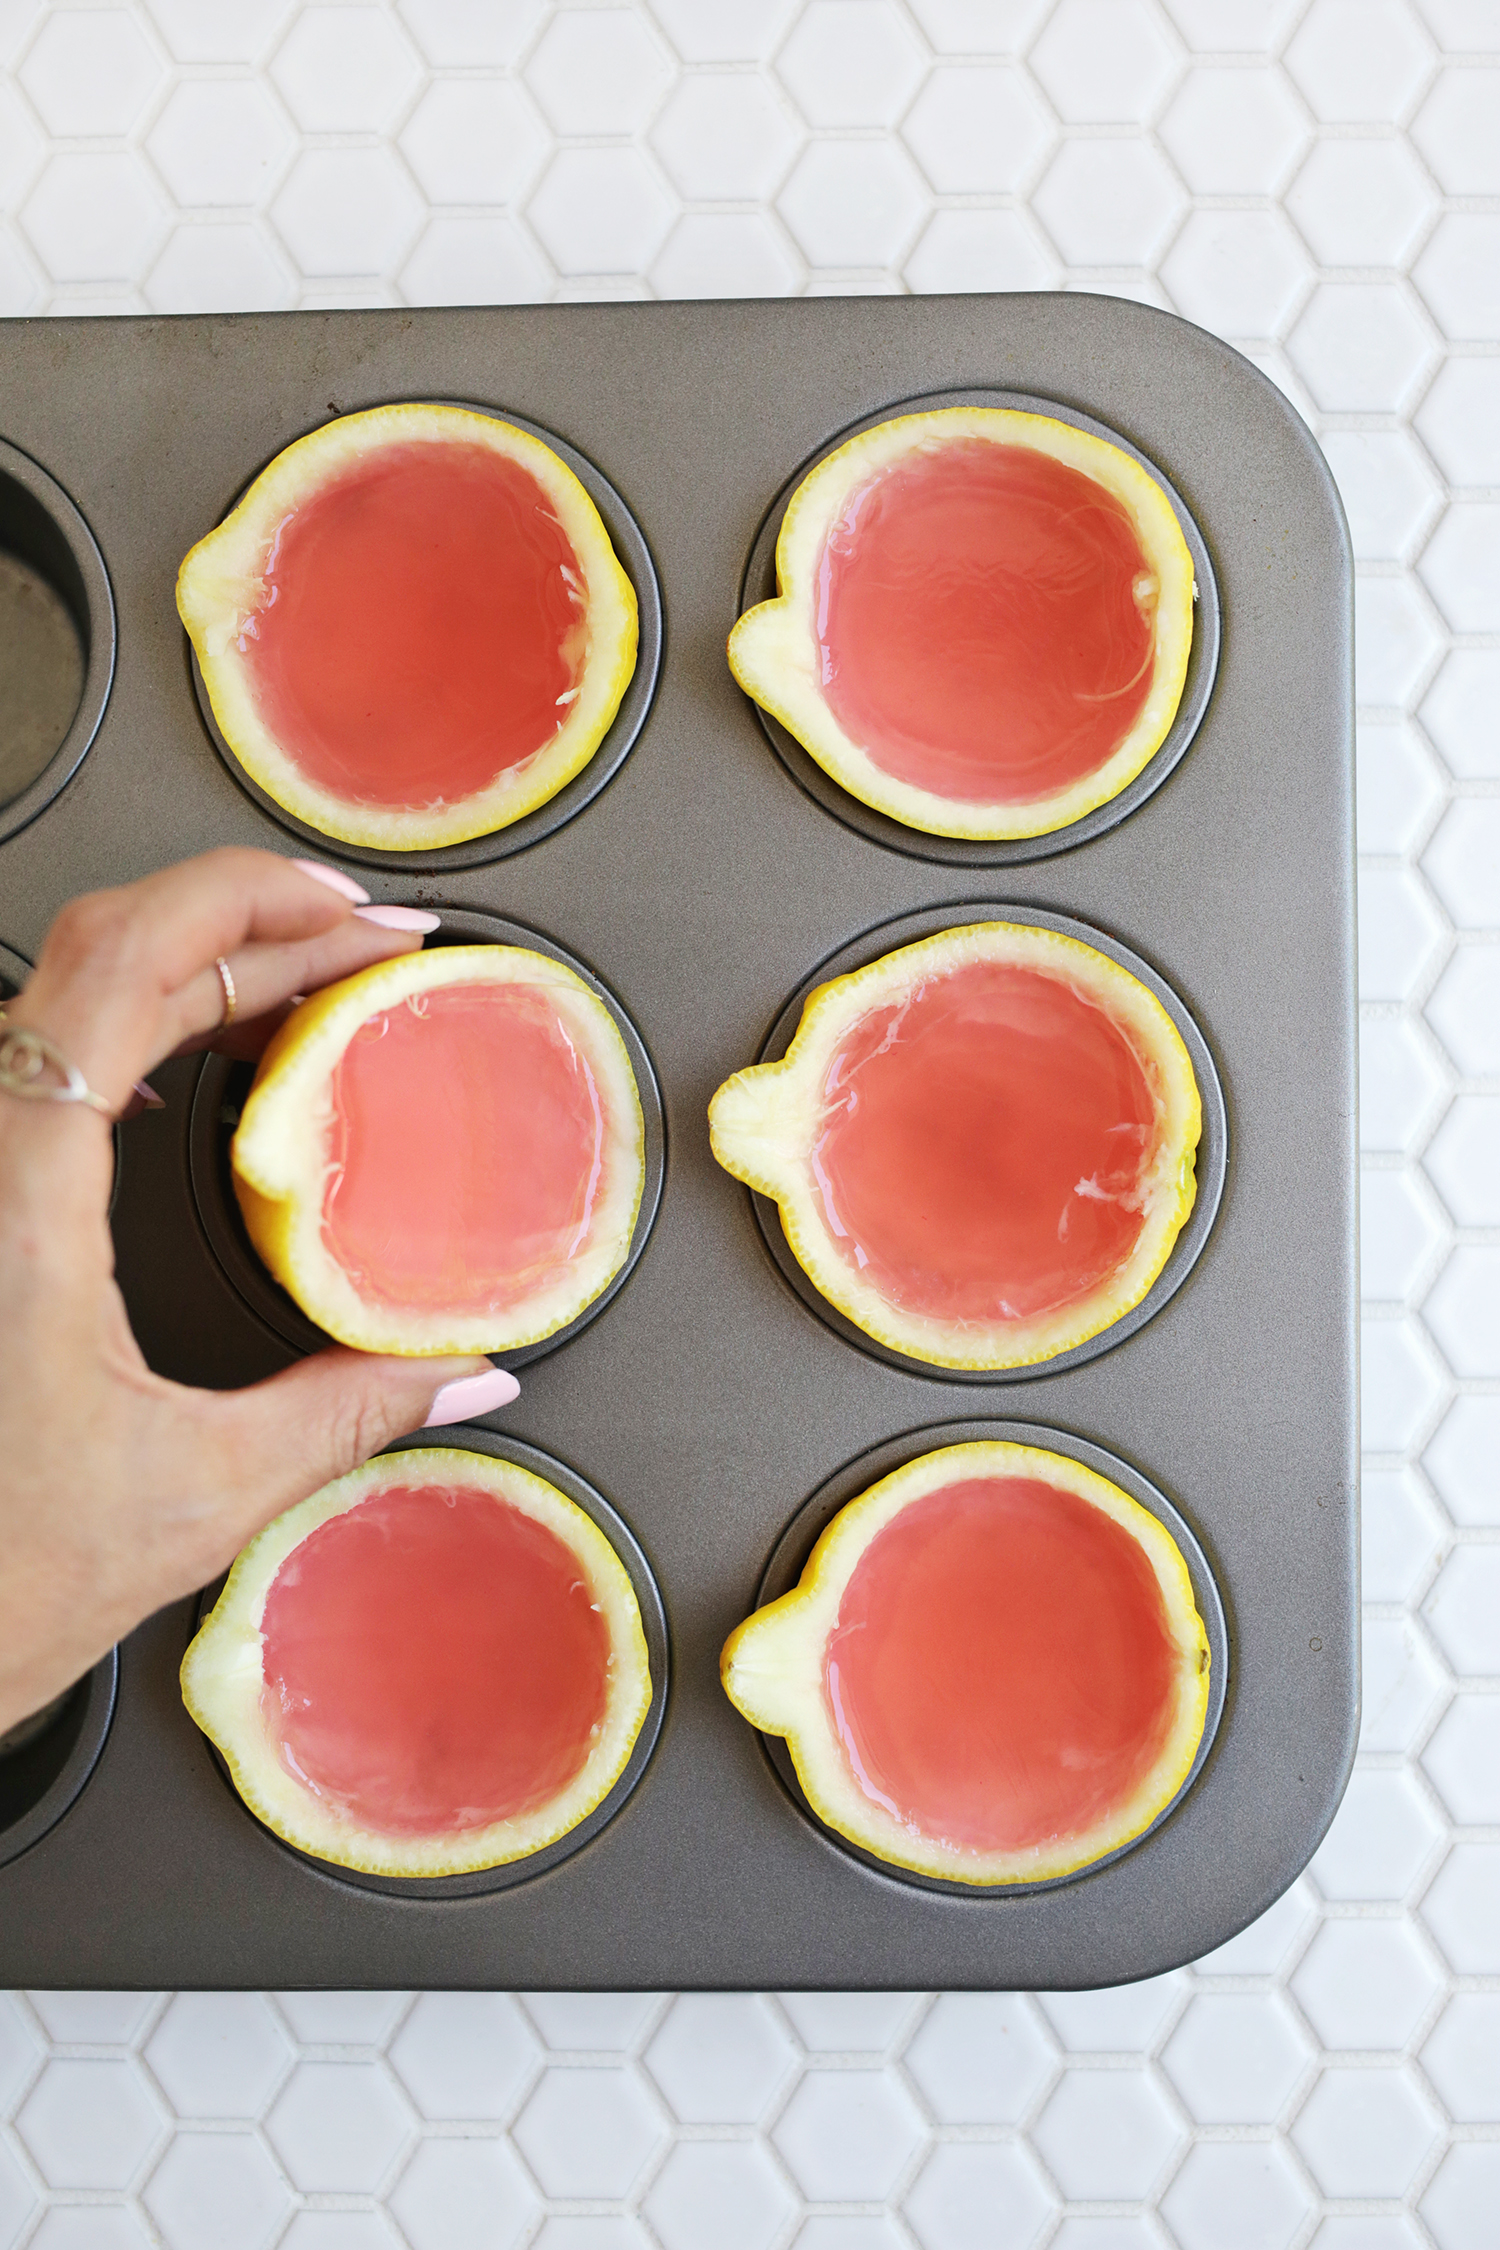 6 hollowed out lemon halves with pink lemonade in them in a muffin pan